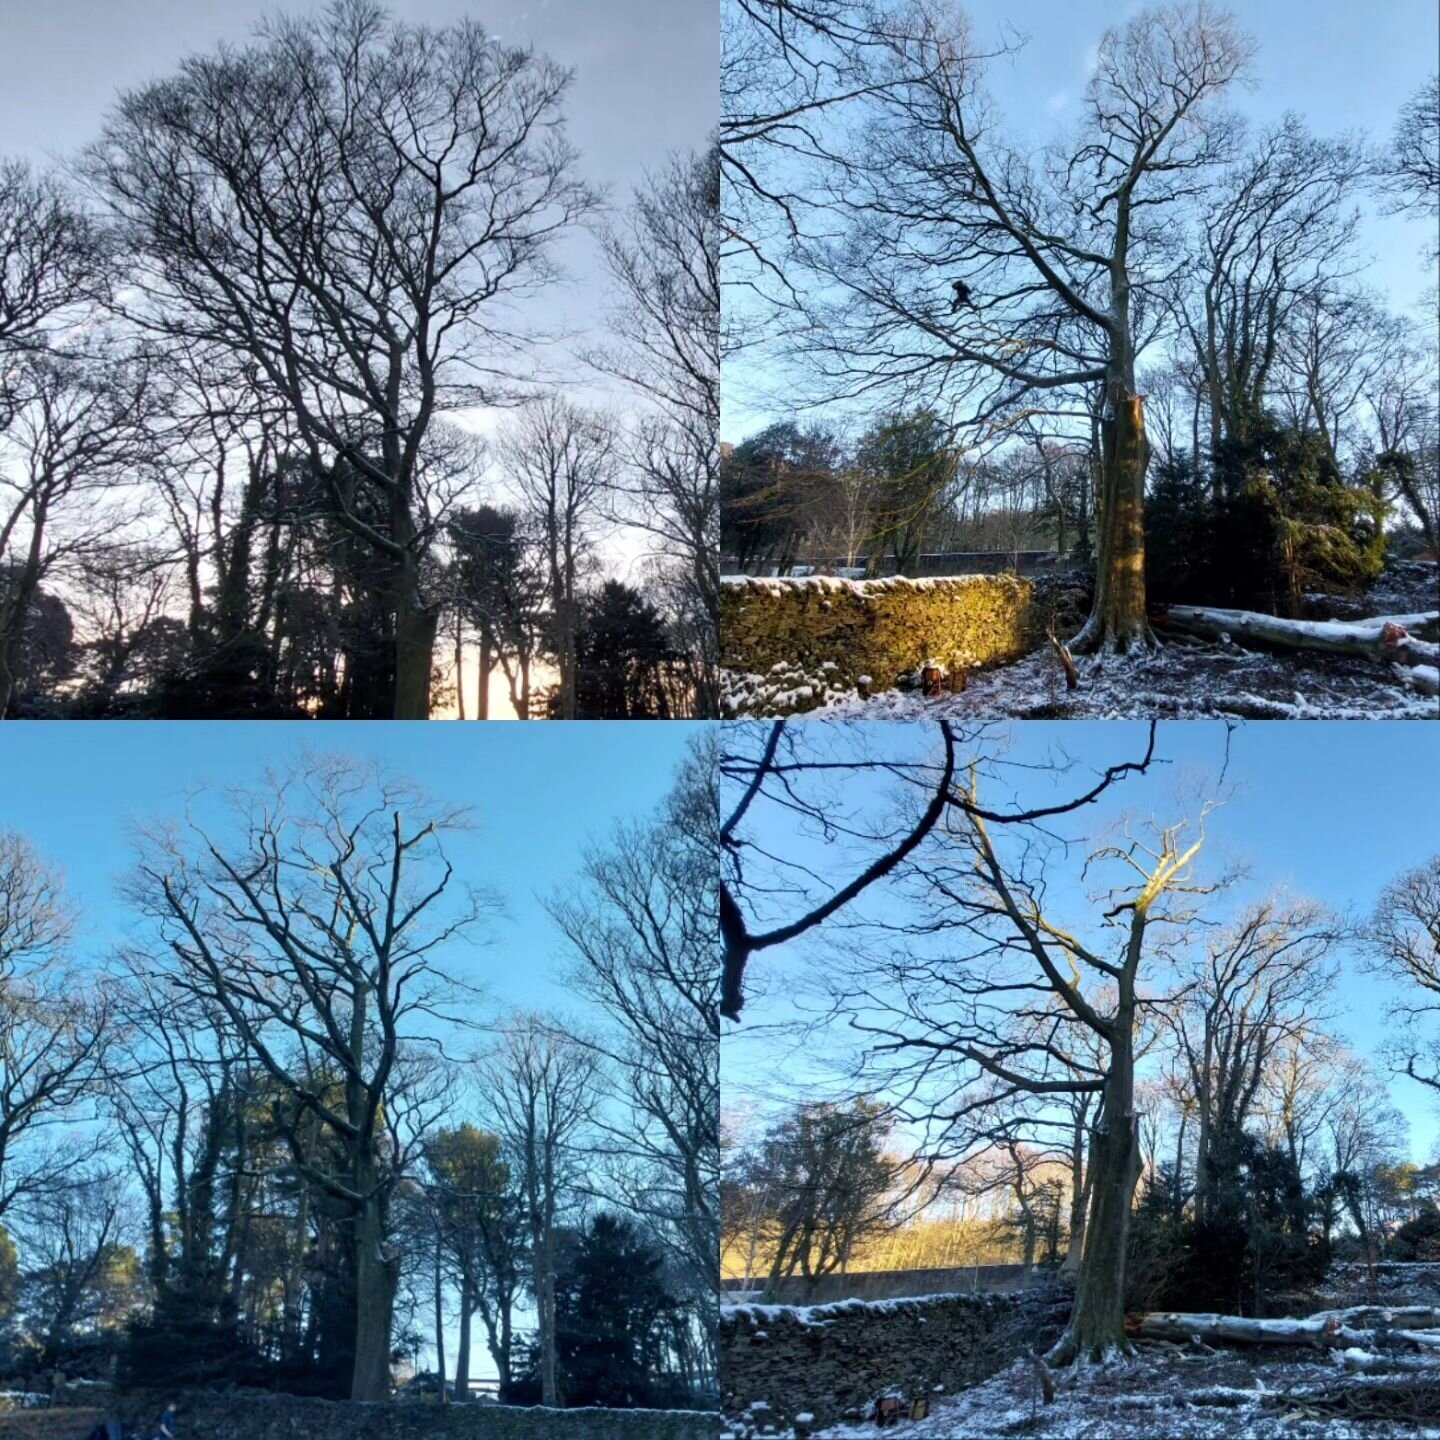 Lovely fresh day in the snow. Before and after, hard reduction on a mature Beech for the @peakdistrictnt after major failure in the winds before Christmas. #treework #stormpia #arboricultural #arborist #stormwork #wind #peakdistrict #nationaltrust #p